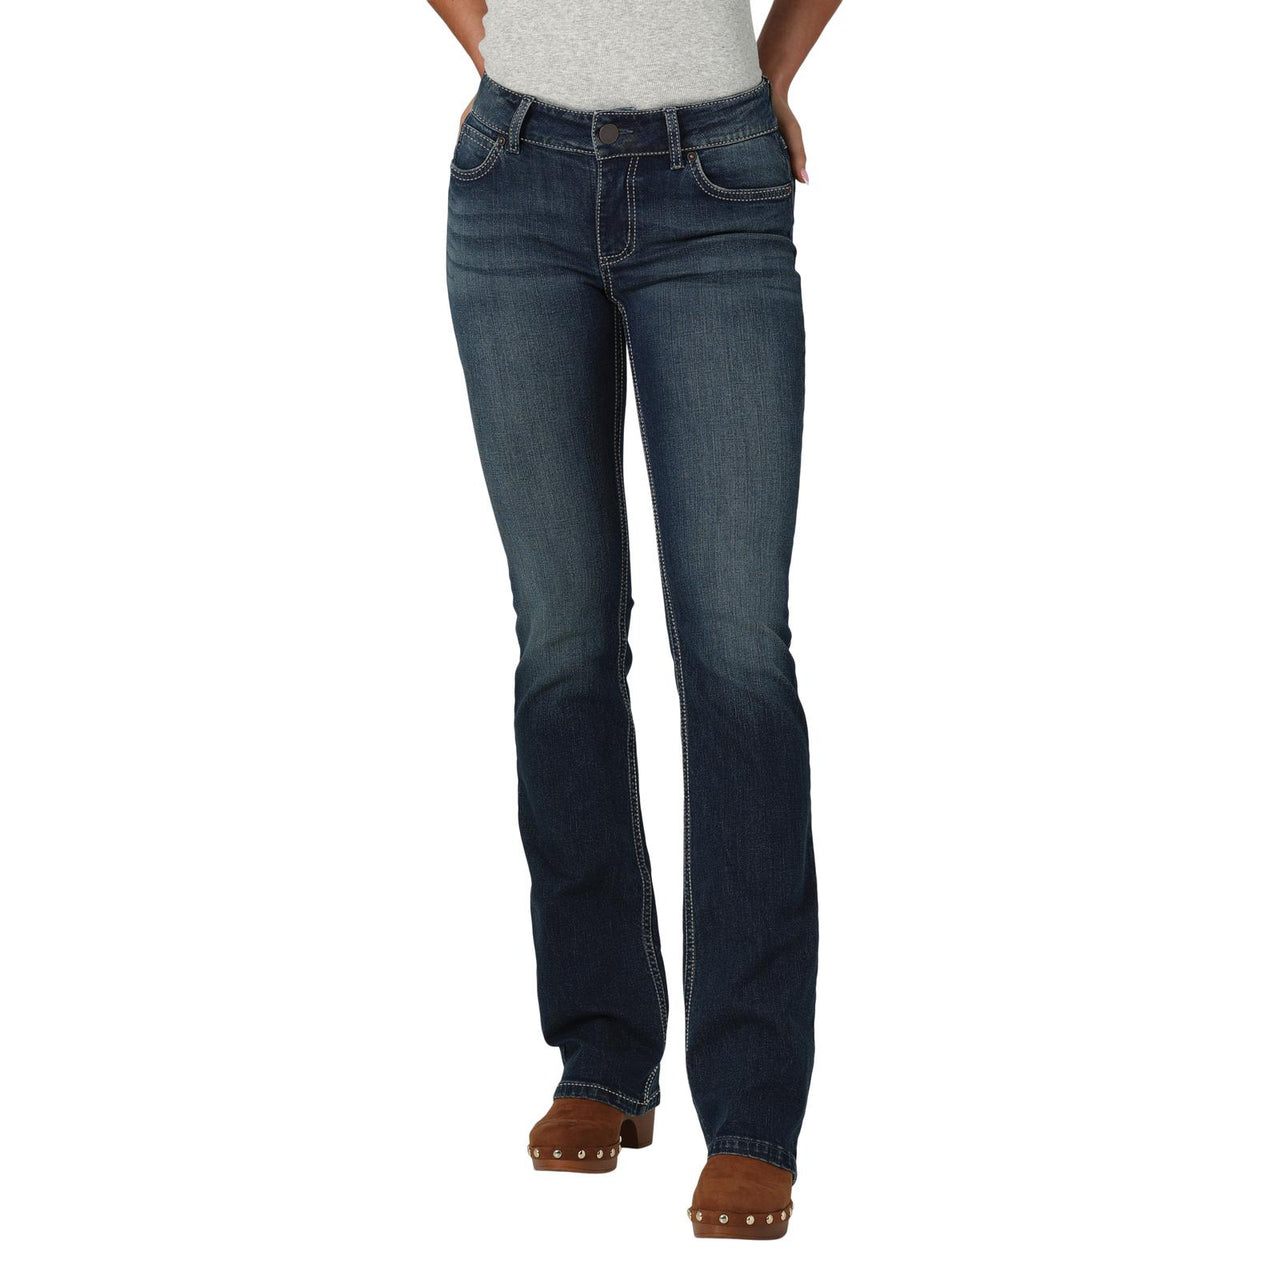 Wrangler Women's Essential Boot Cut Jeans - Taylor